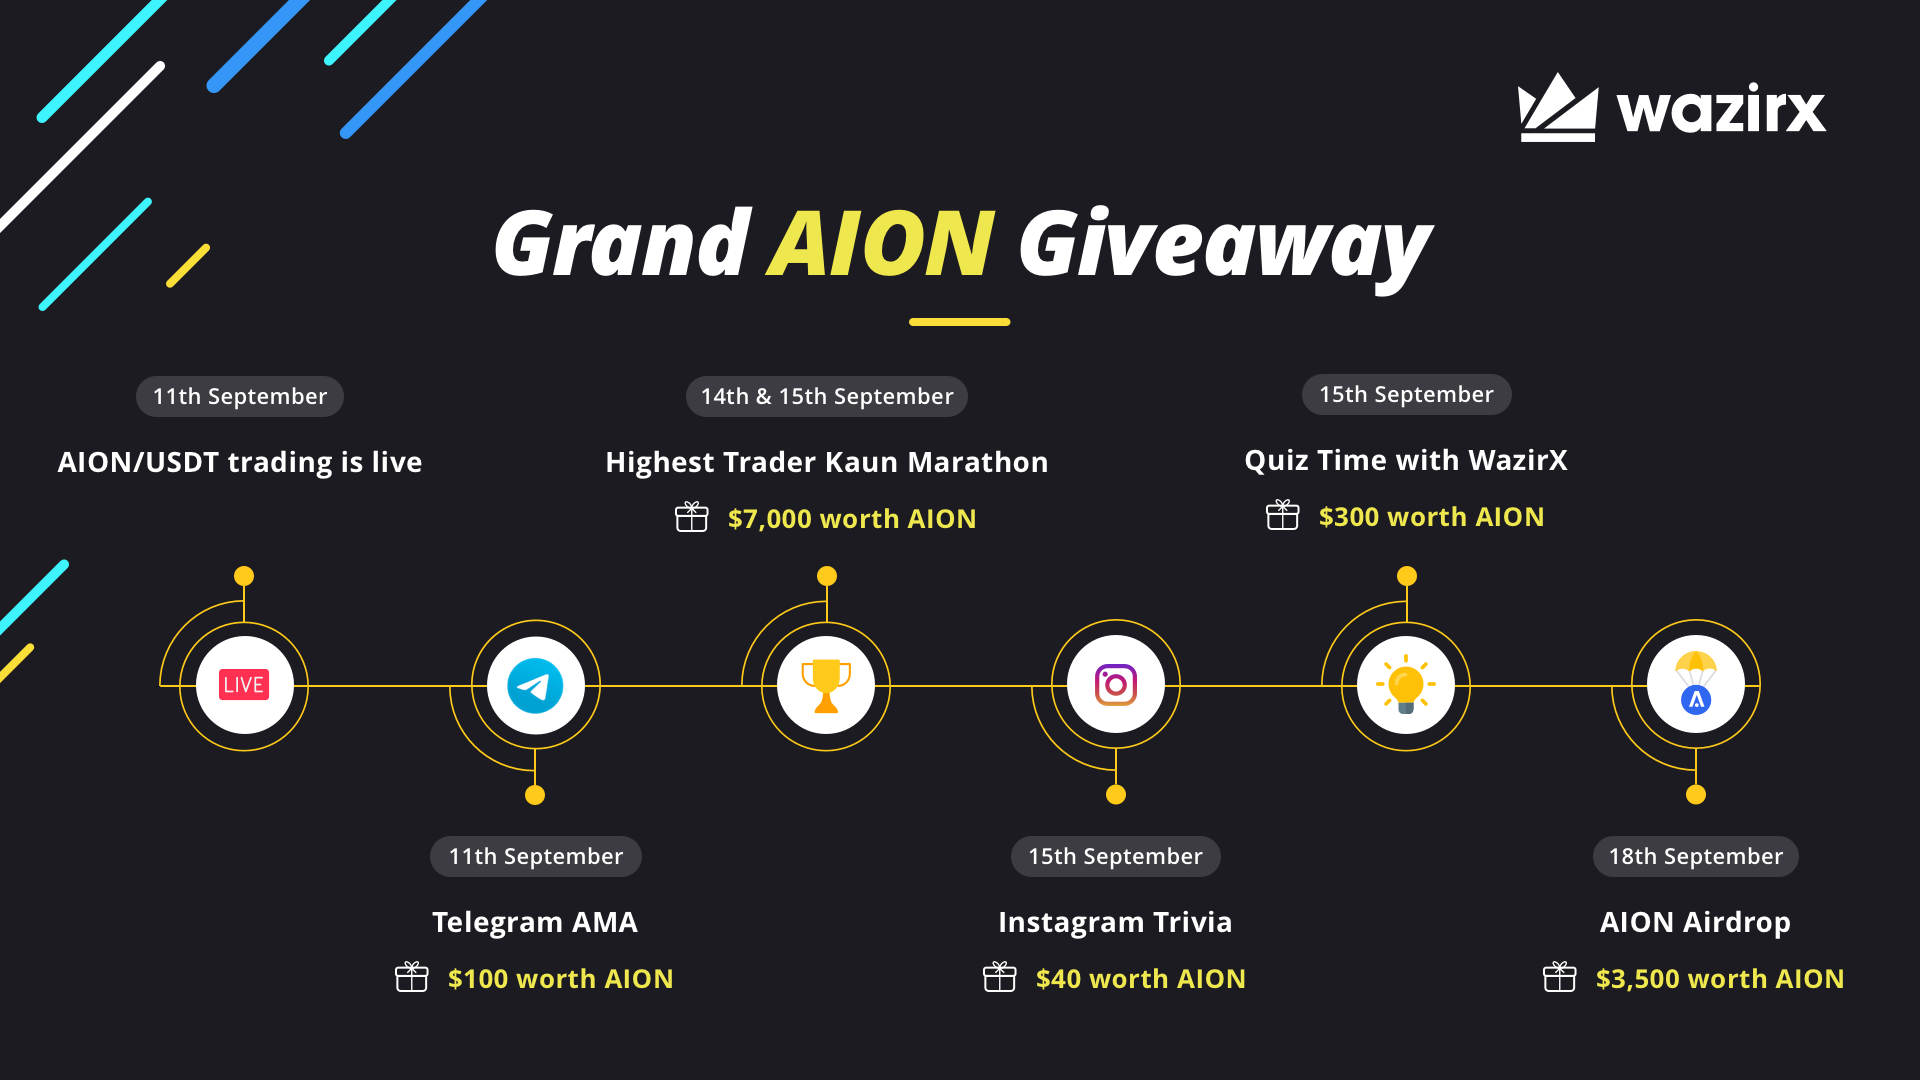 Grand AION Giveaway